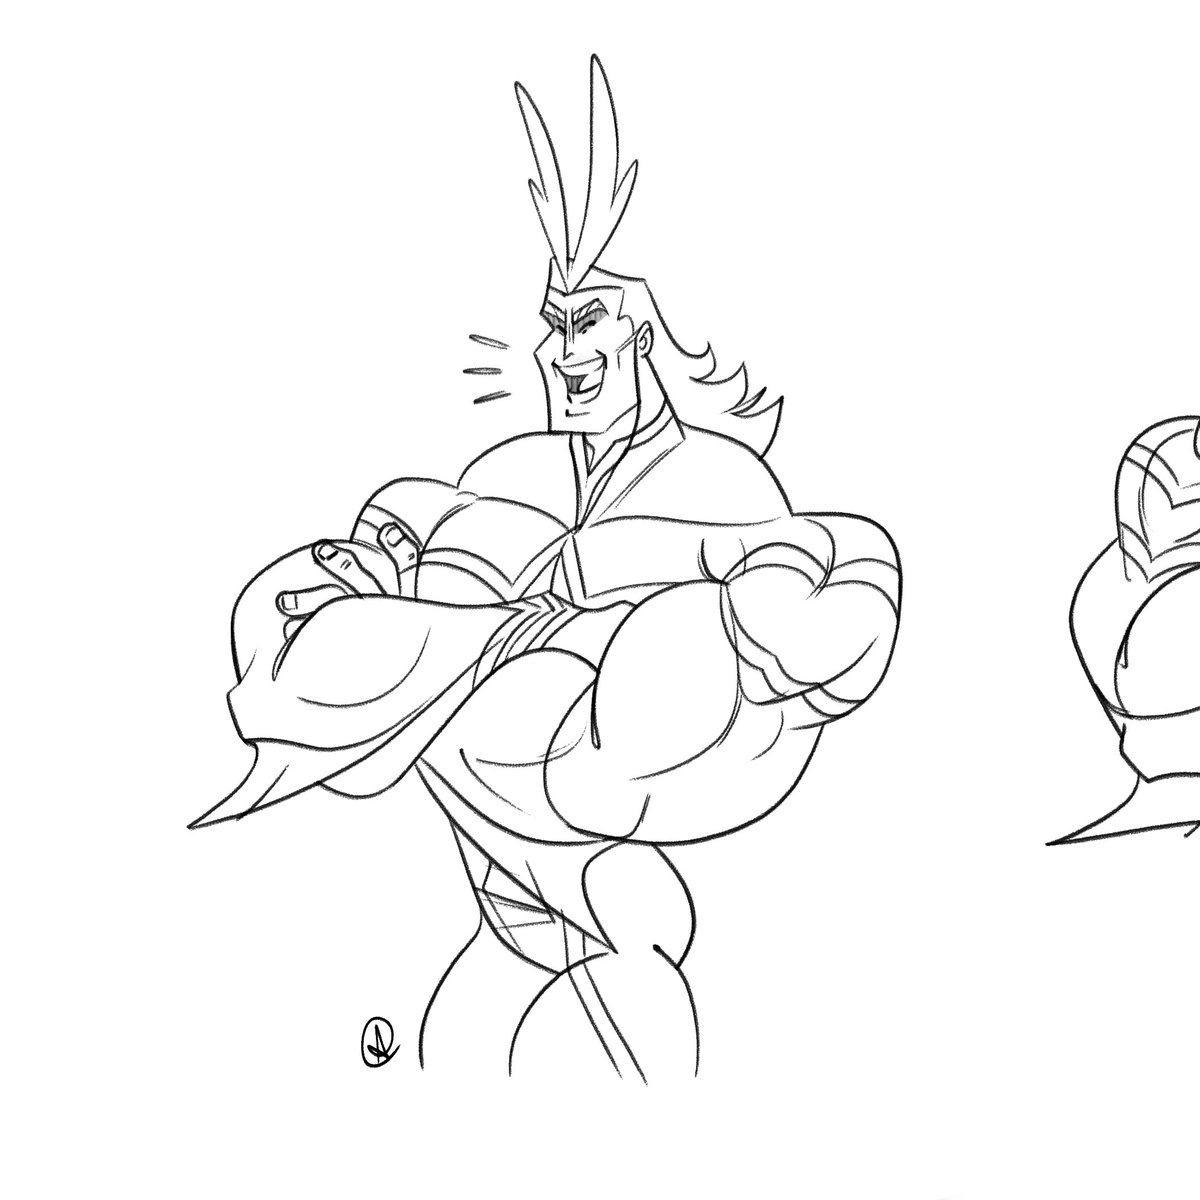 Here's more All Might doodles no one asked for 